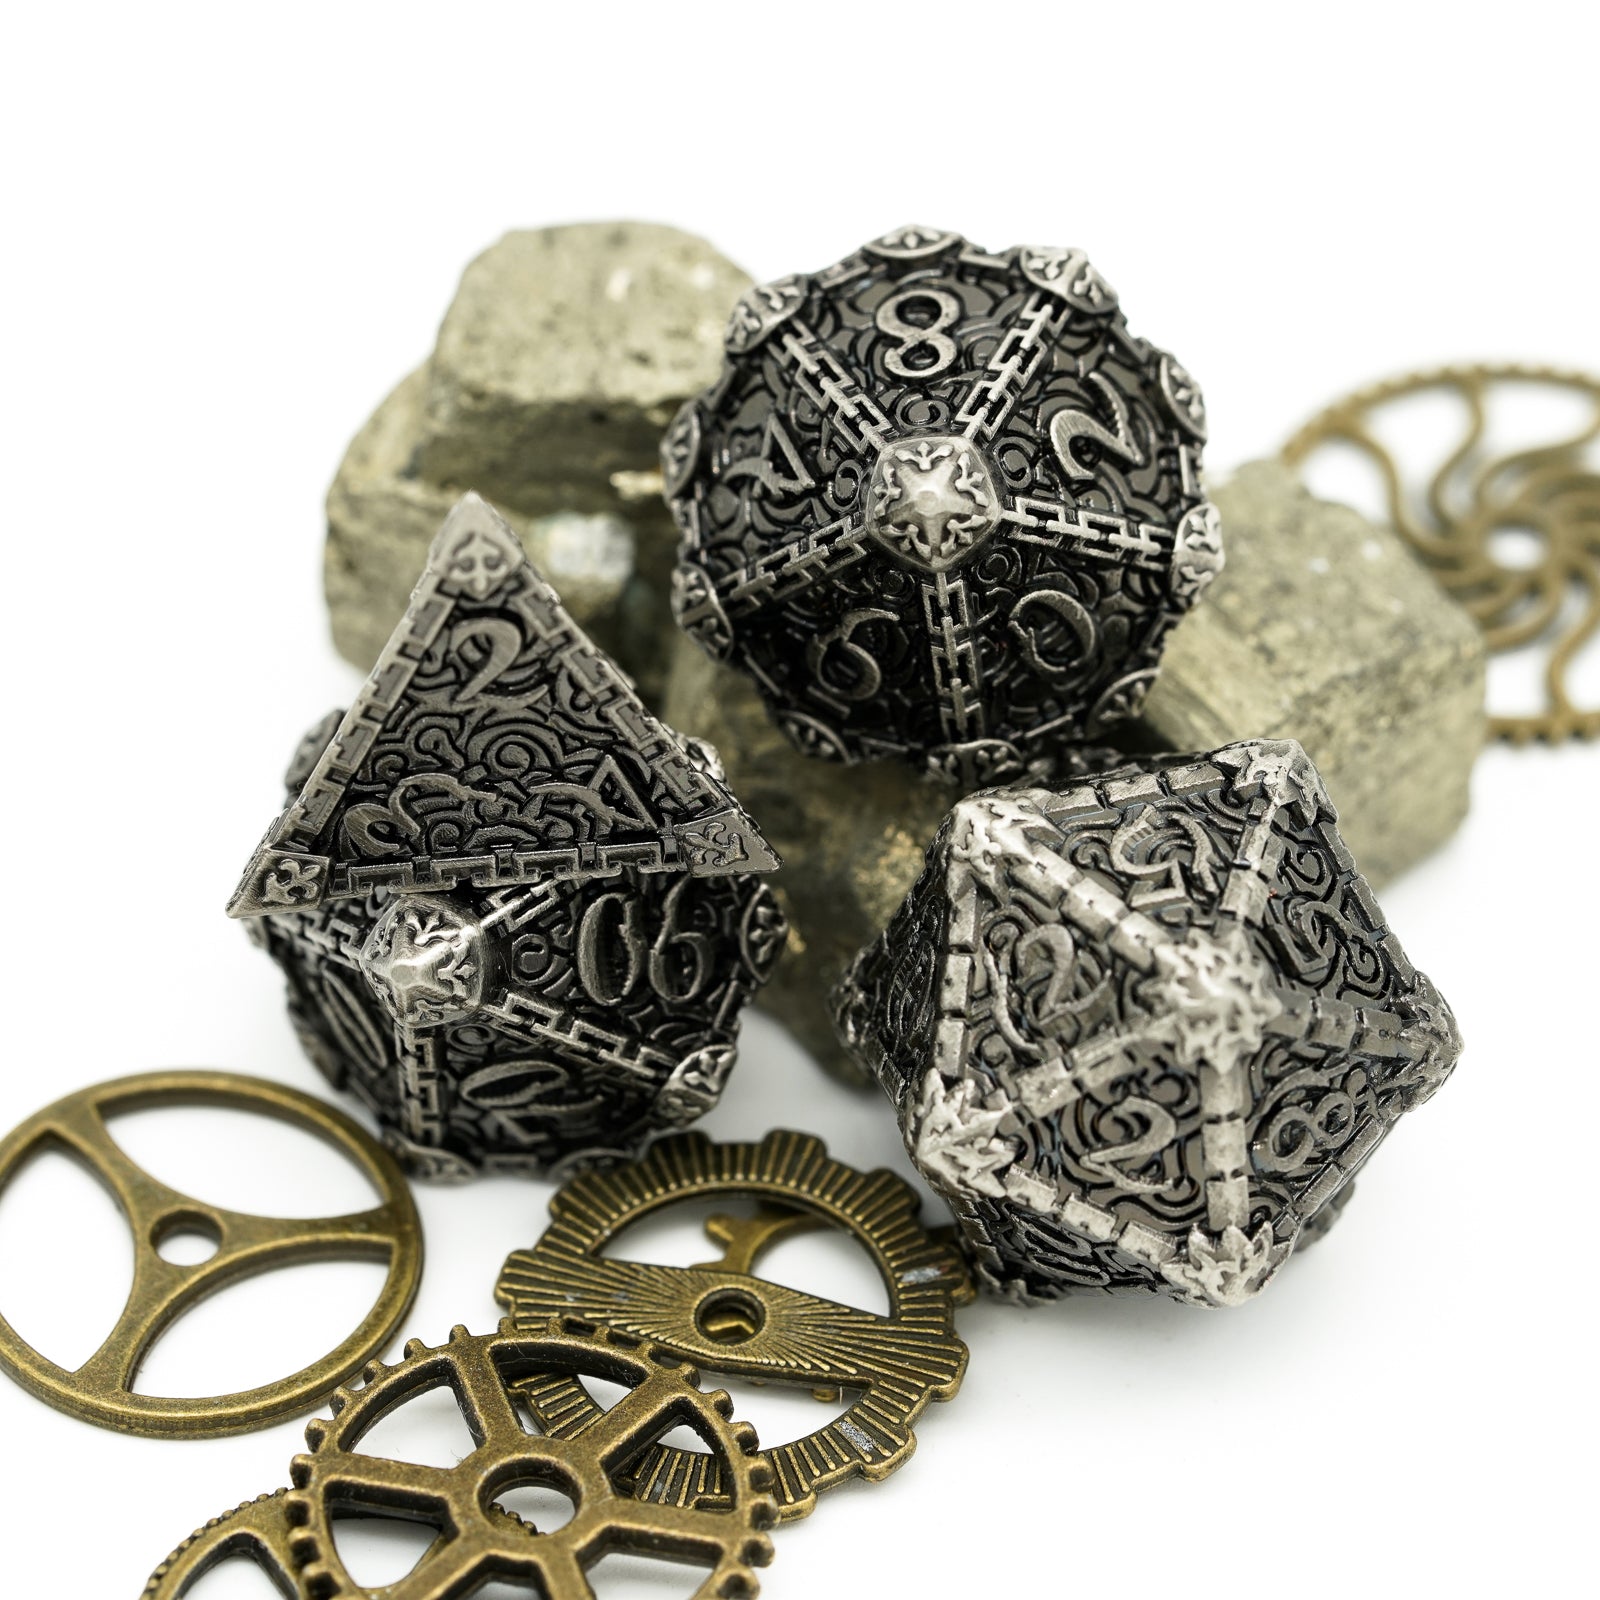 4 stone colored metal dice displayed on gears and rocks